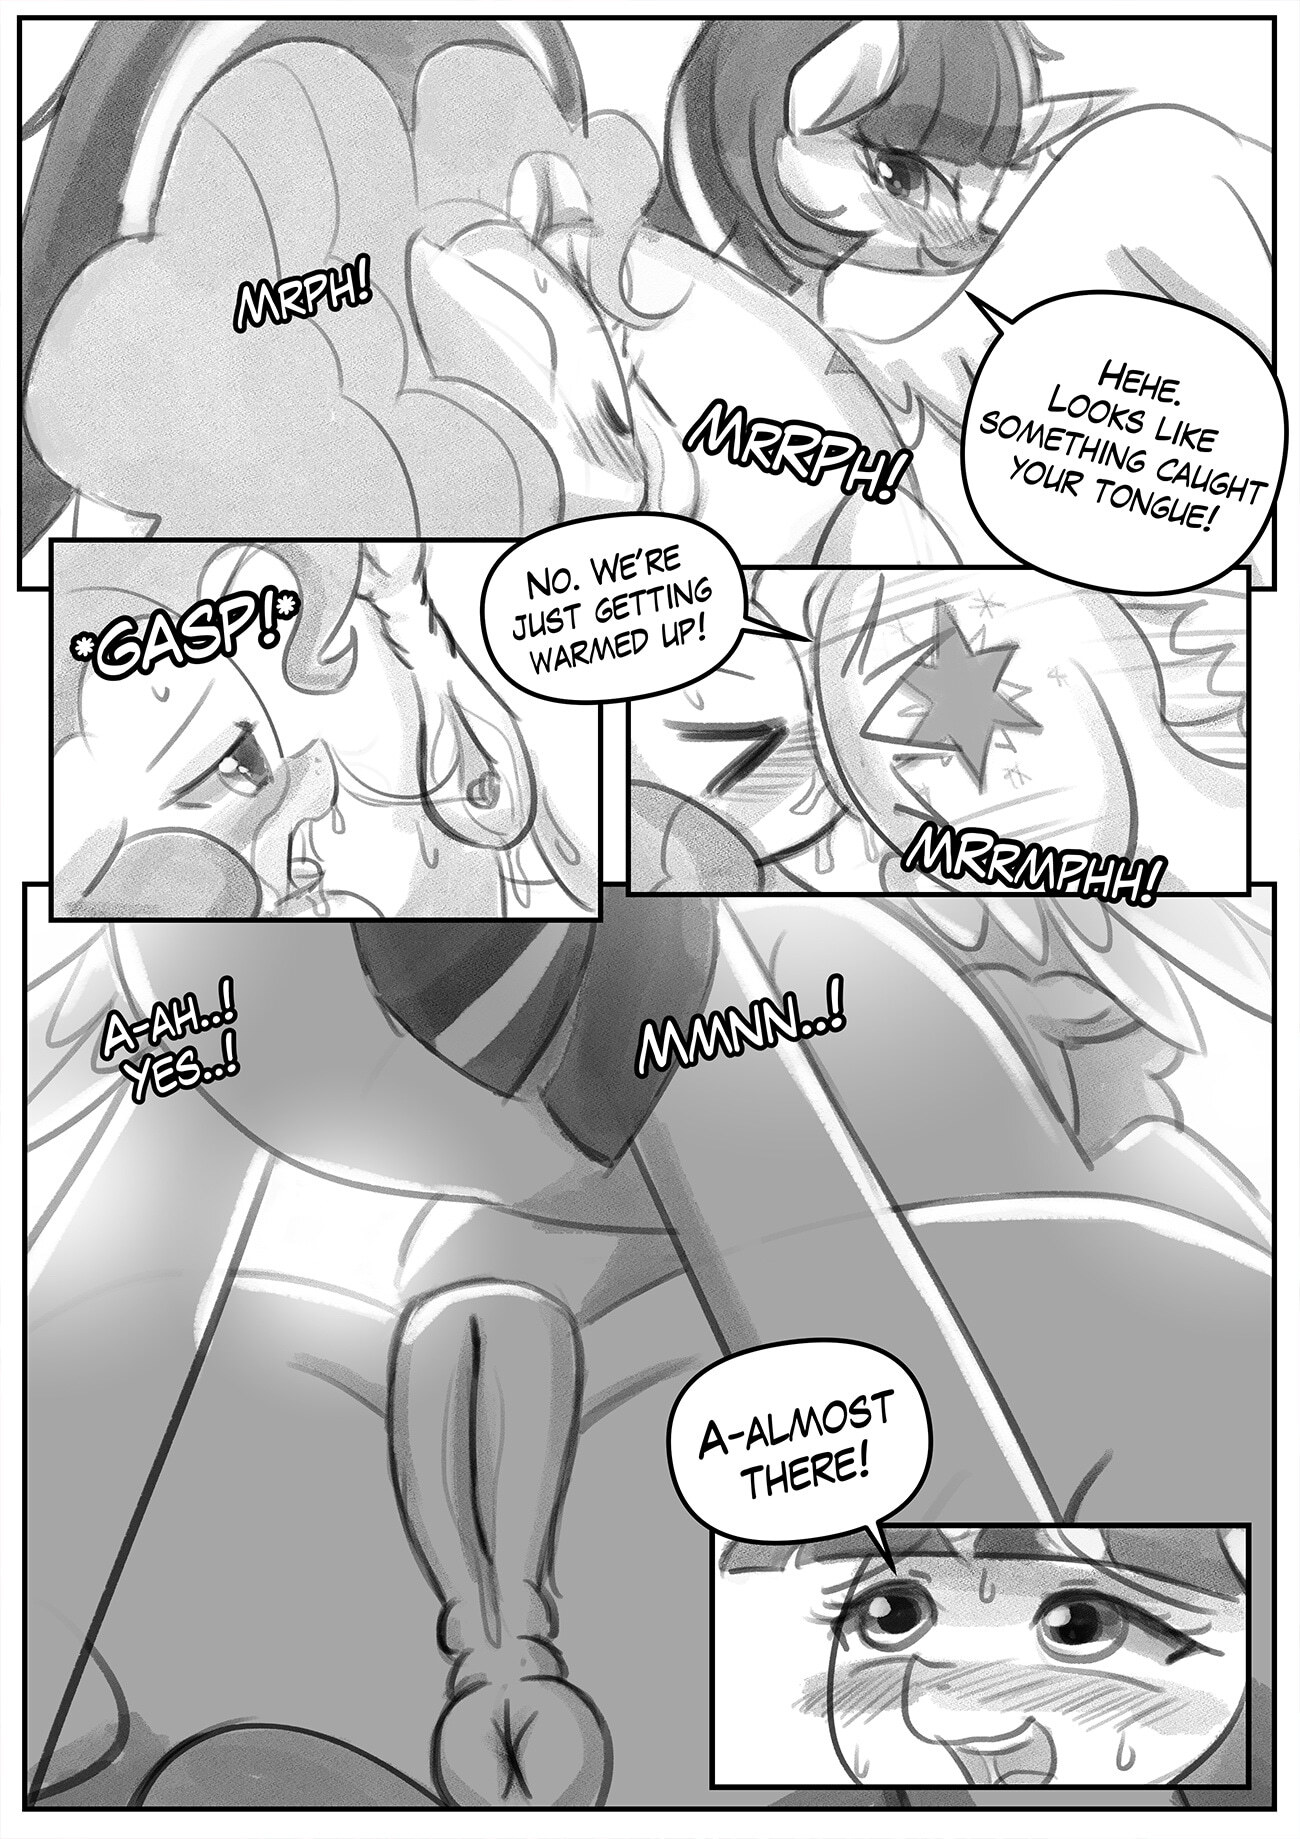 A Trivial Plot - Page 3